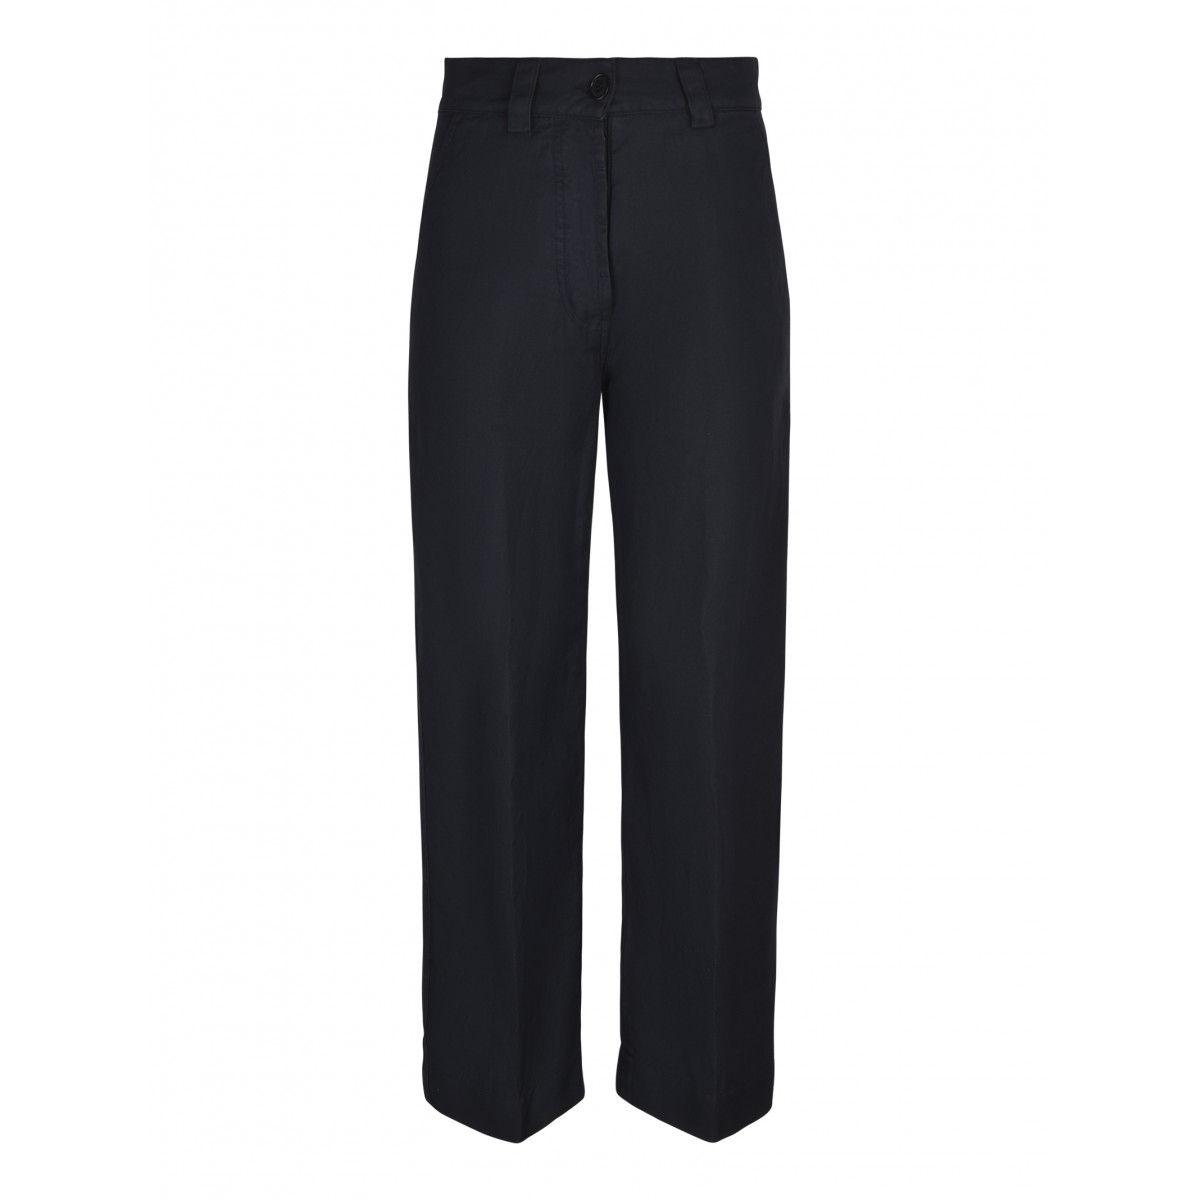 Navy Cotton and Linen Pants